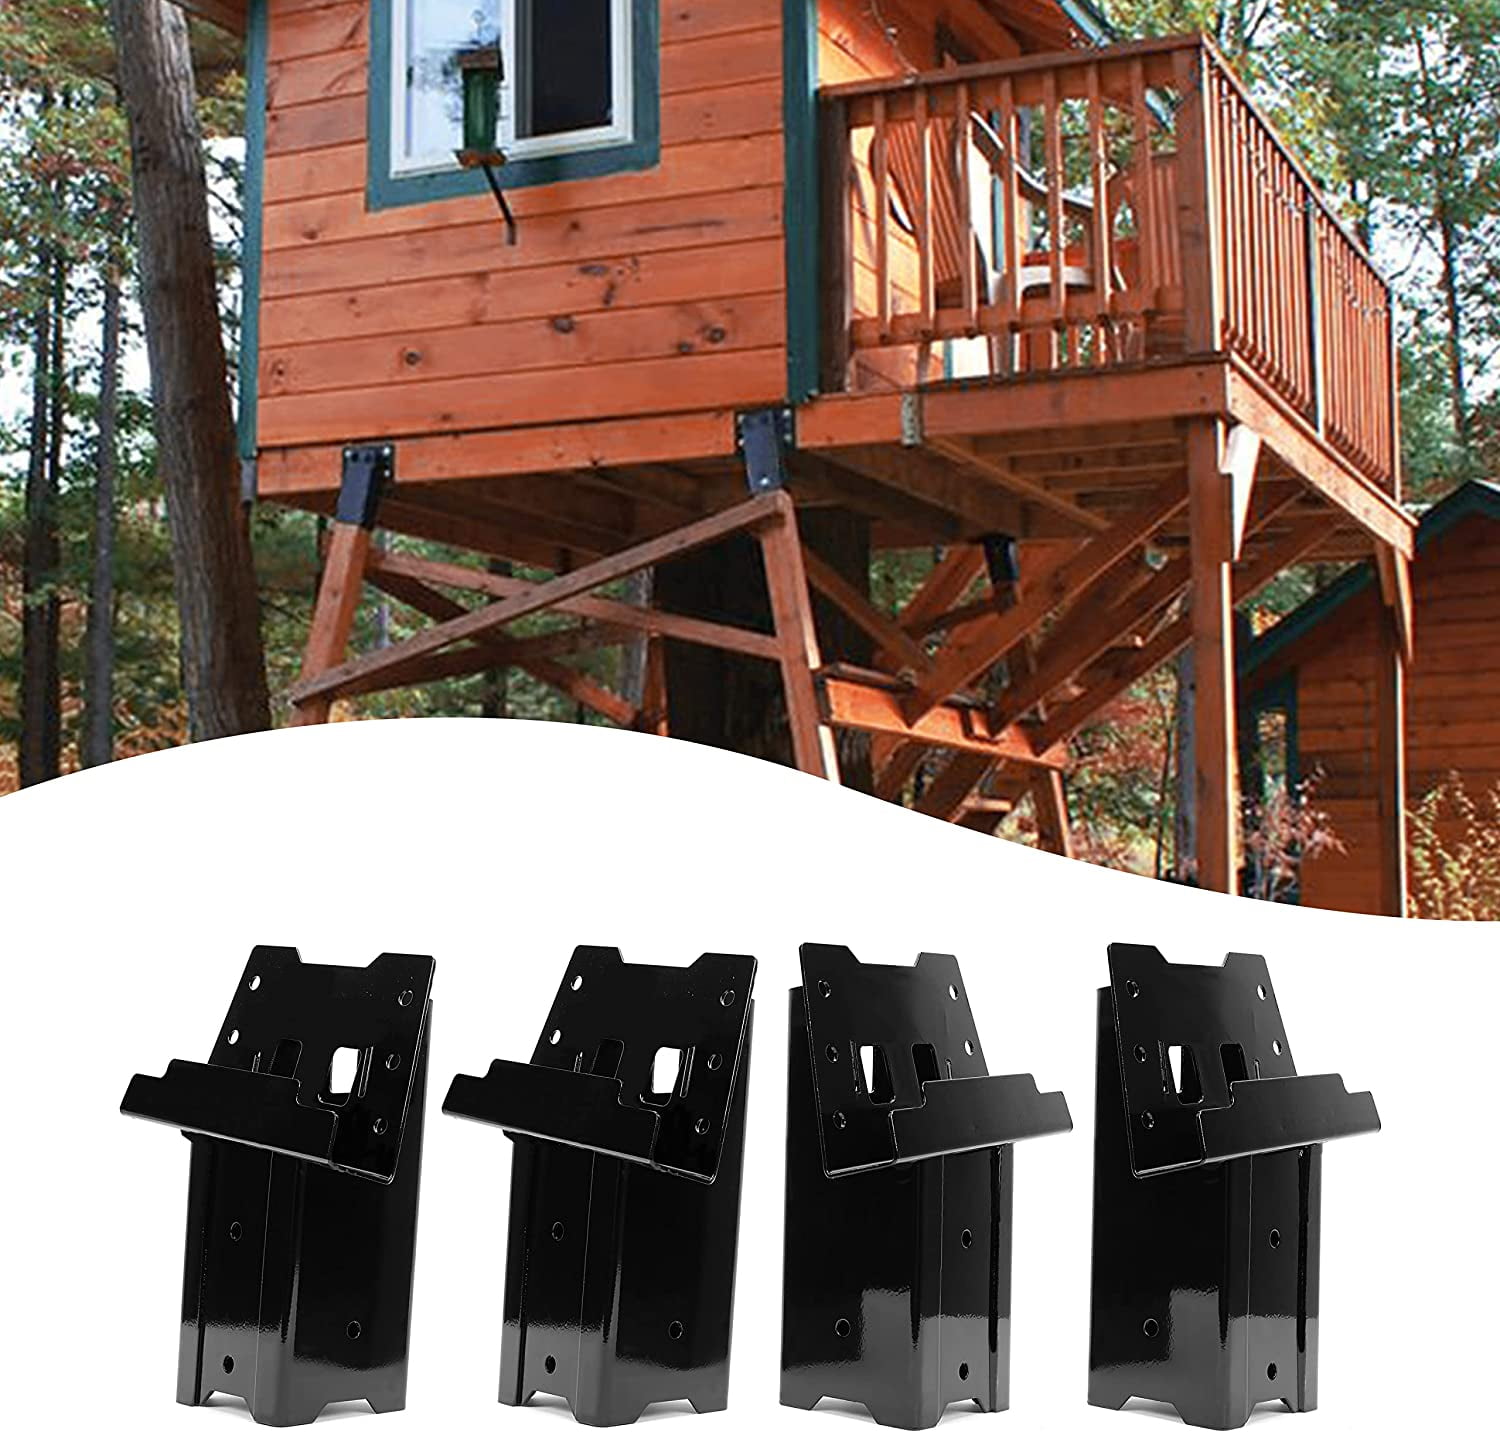 Details about   4X4 Steel Hunting Blinds Post Platform Brackets Elevate Tree Houses Deck Outdoor 